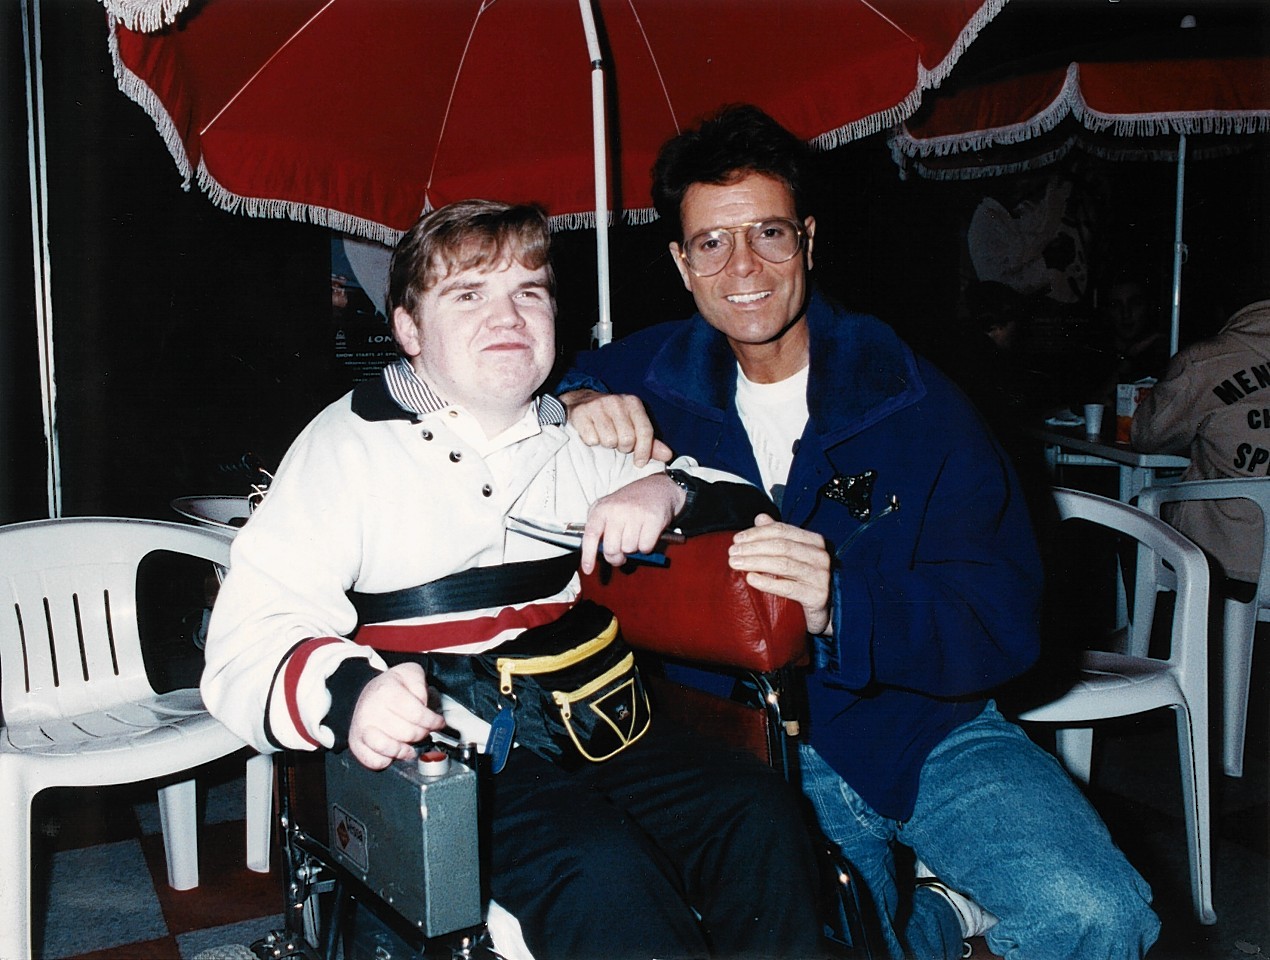 Steven with Cliff Richard